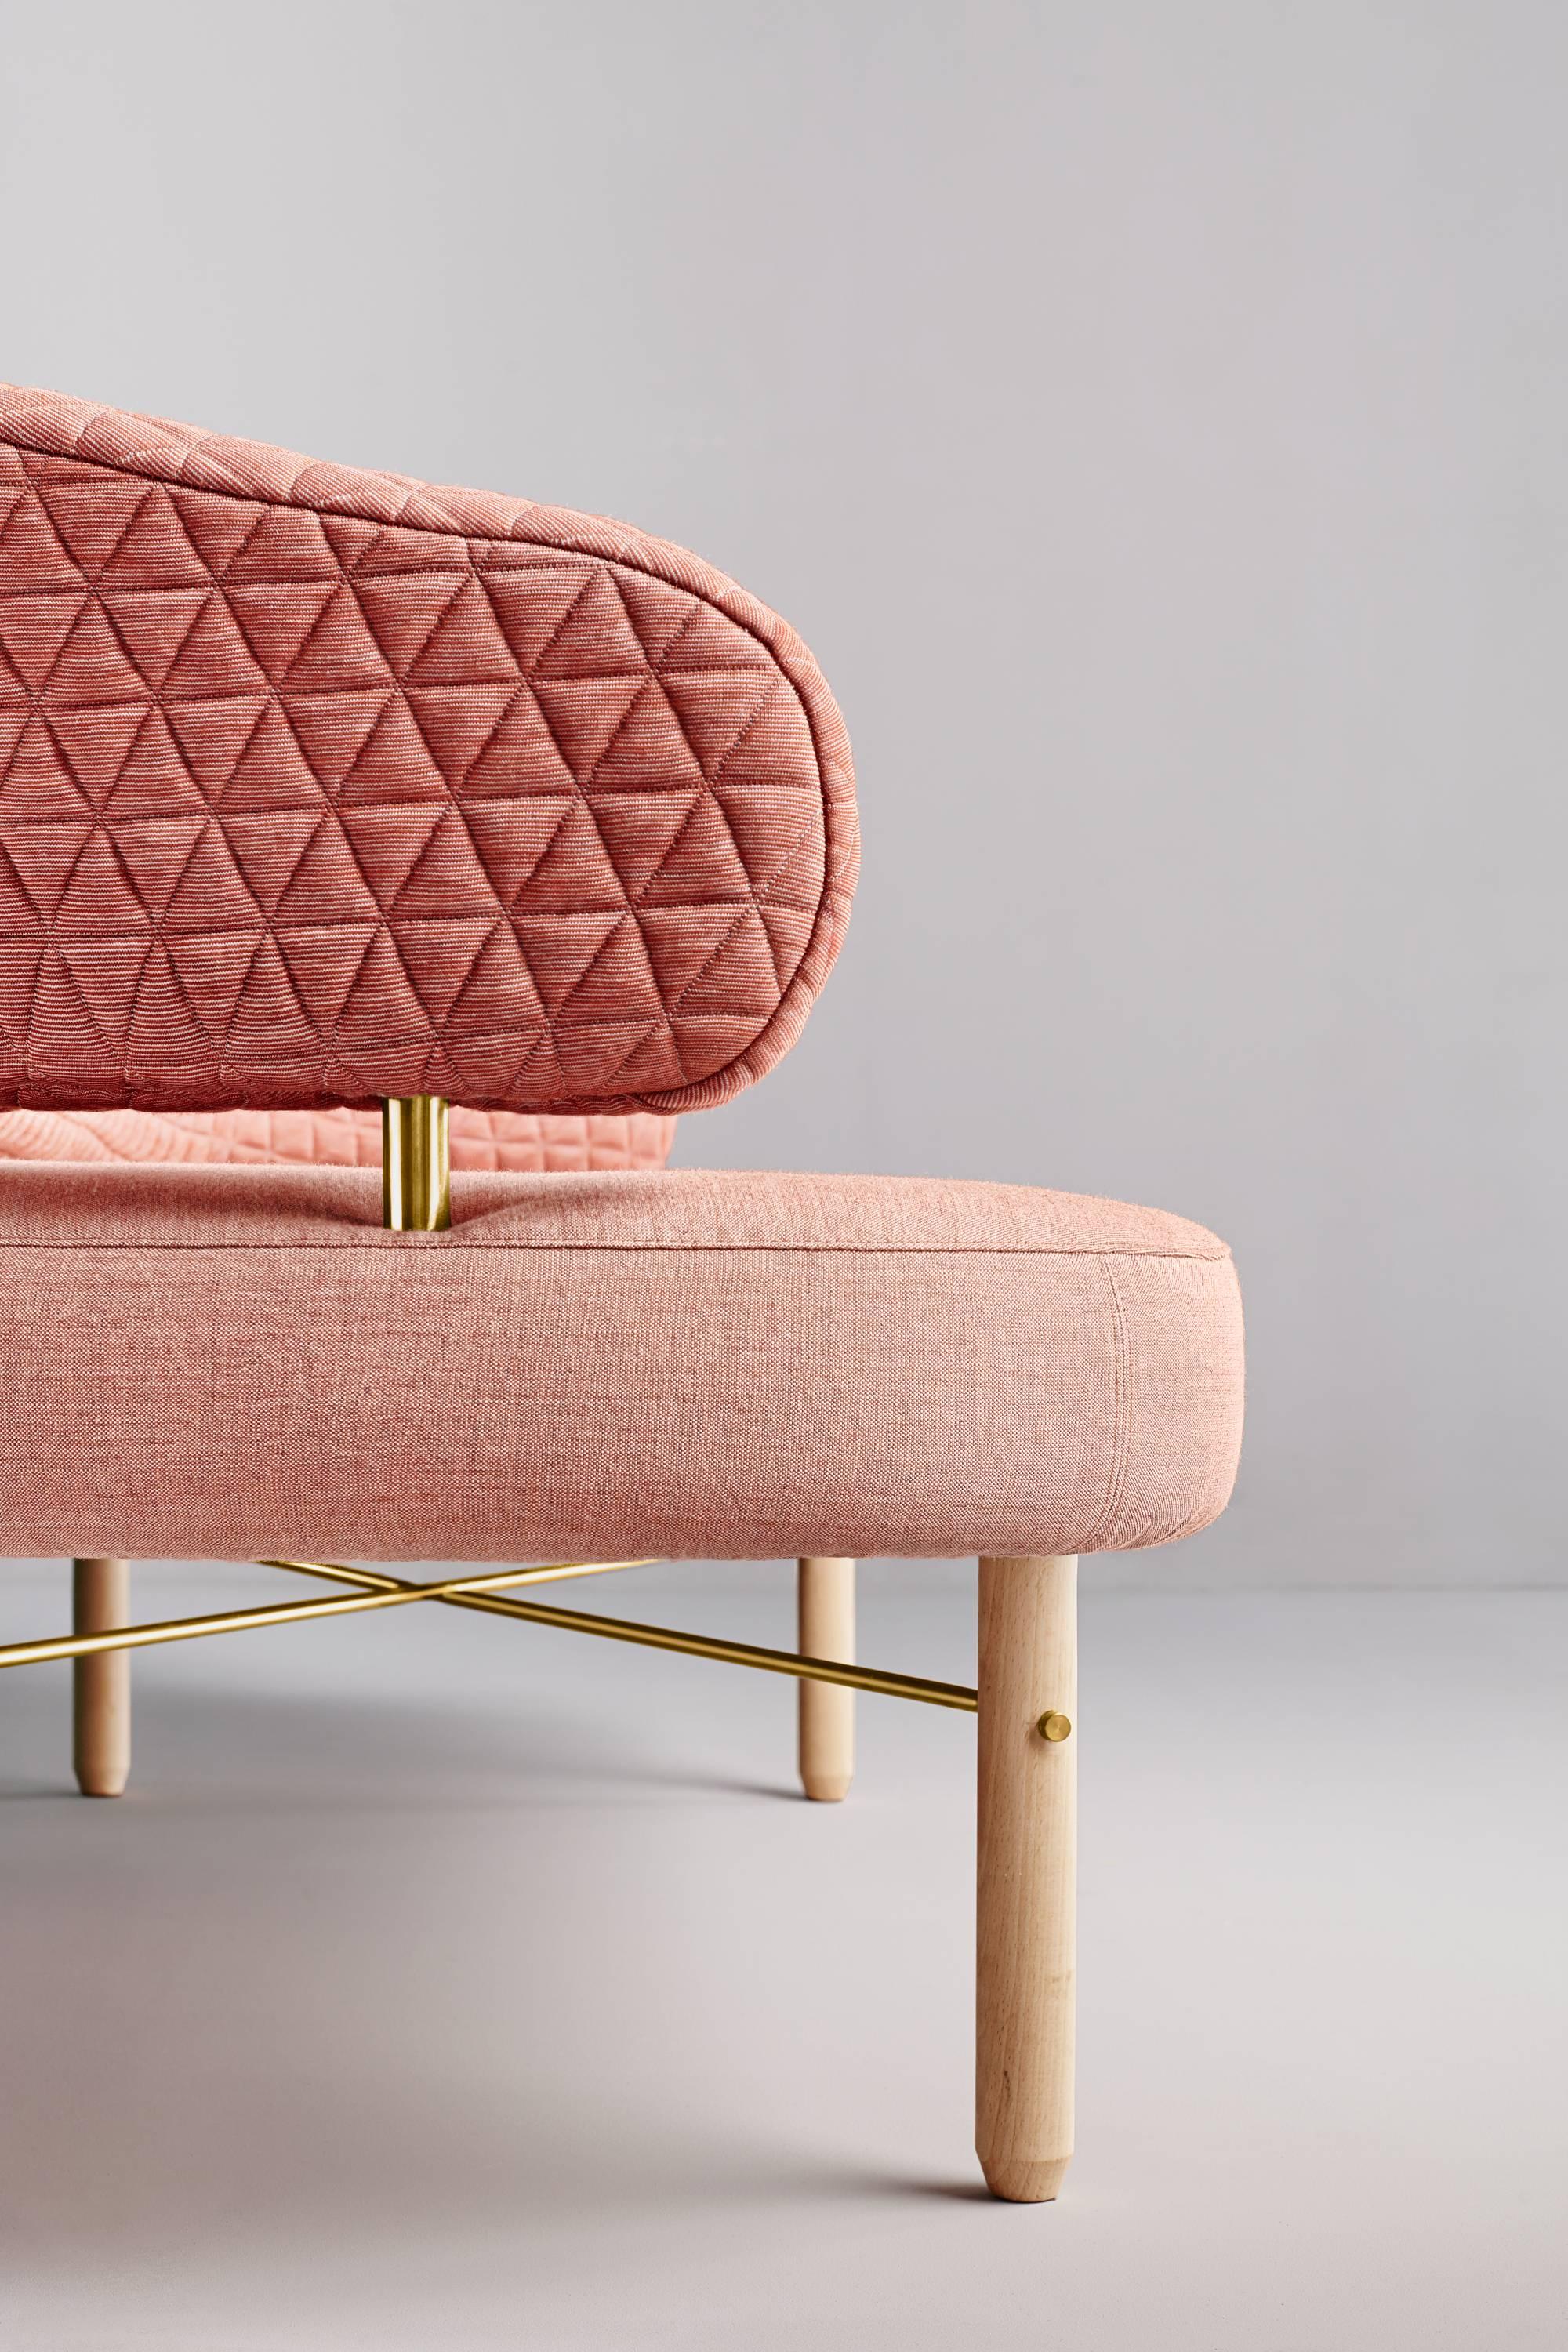 Simone sofa, Sputnik studio, Design Homage to Nina Simone
Elegant and flirty, Simone catches the attention of every person in the room, with its back suspended over the seat letting us see the beautiful gap between both parts and the golden metal